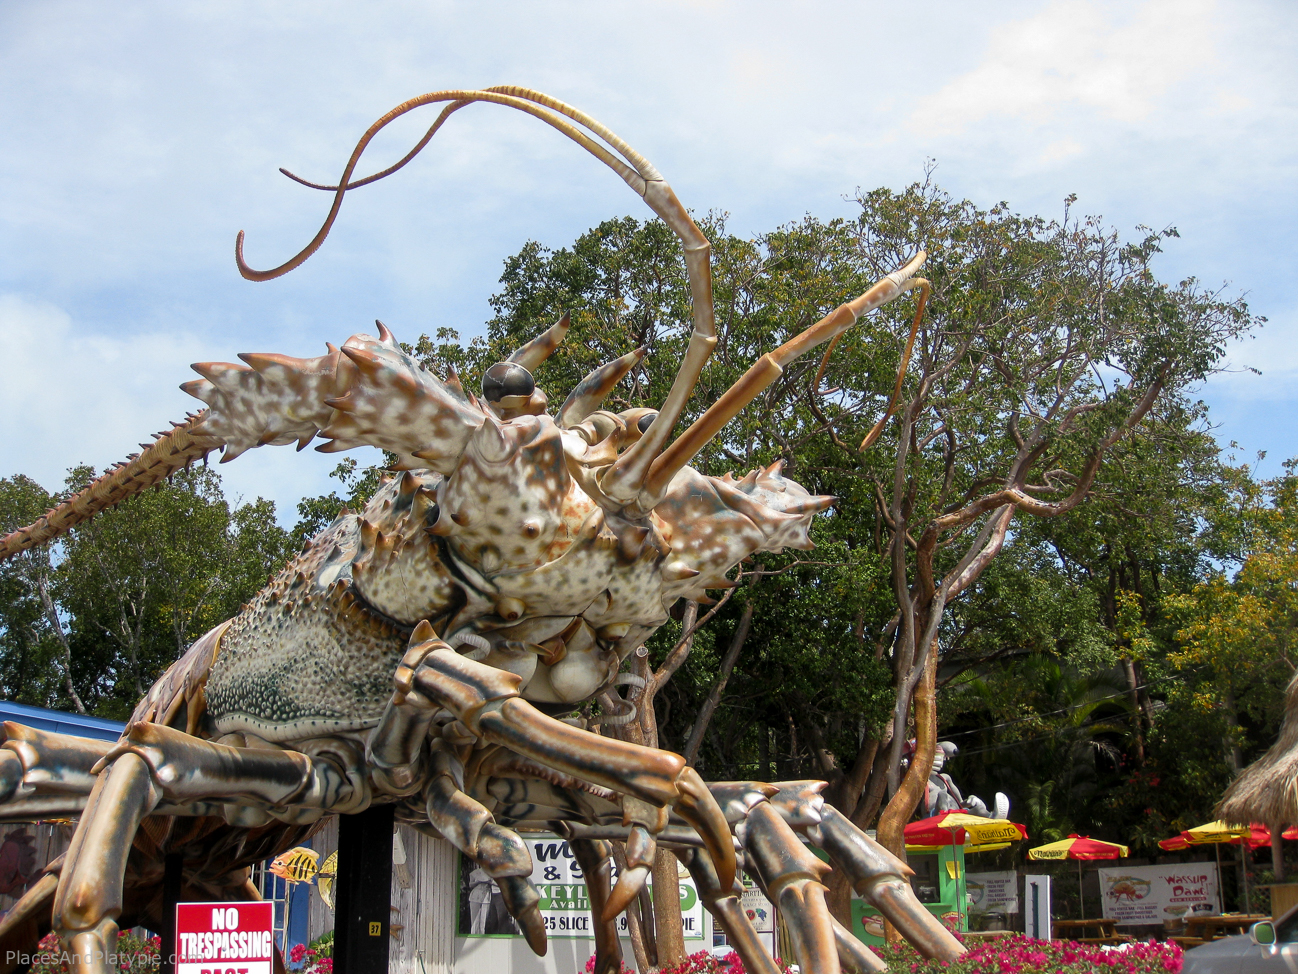 On our way to Key West, a giant Florida Lobster in front of a ticky-tacky gift shop welcomes us to the top of the Keys.